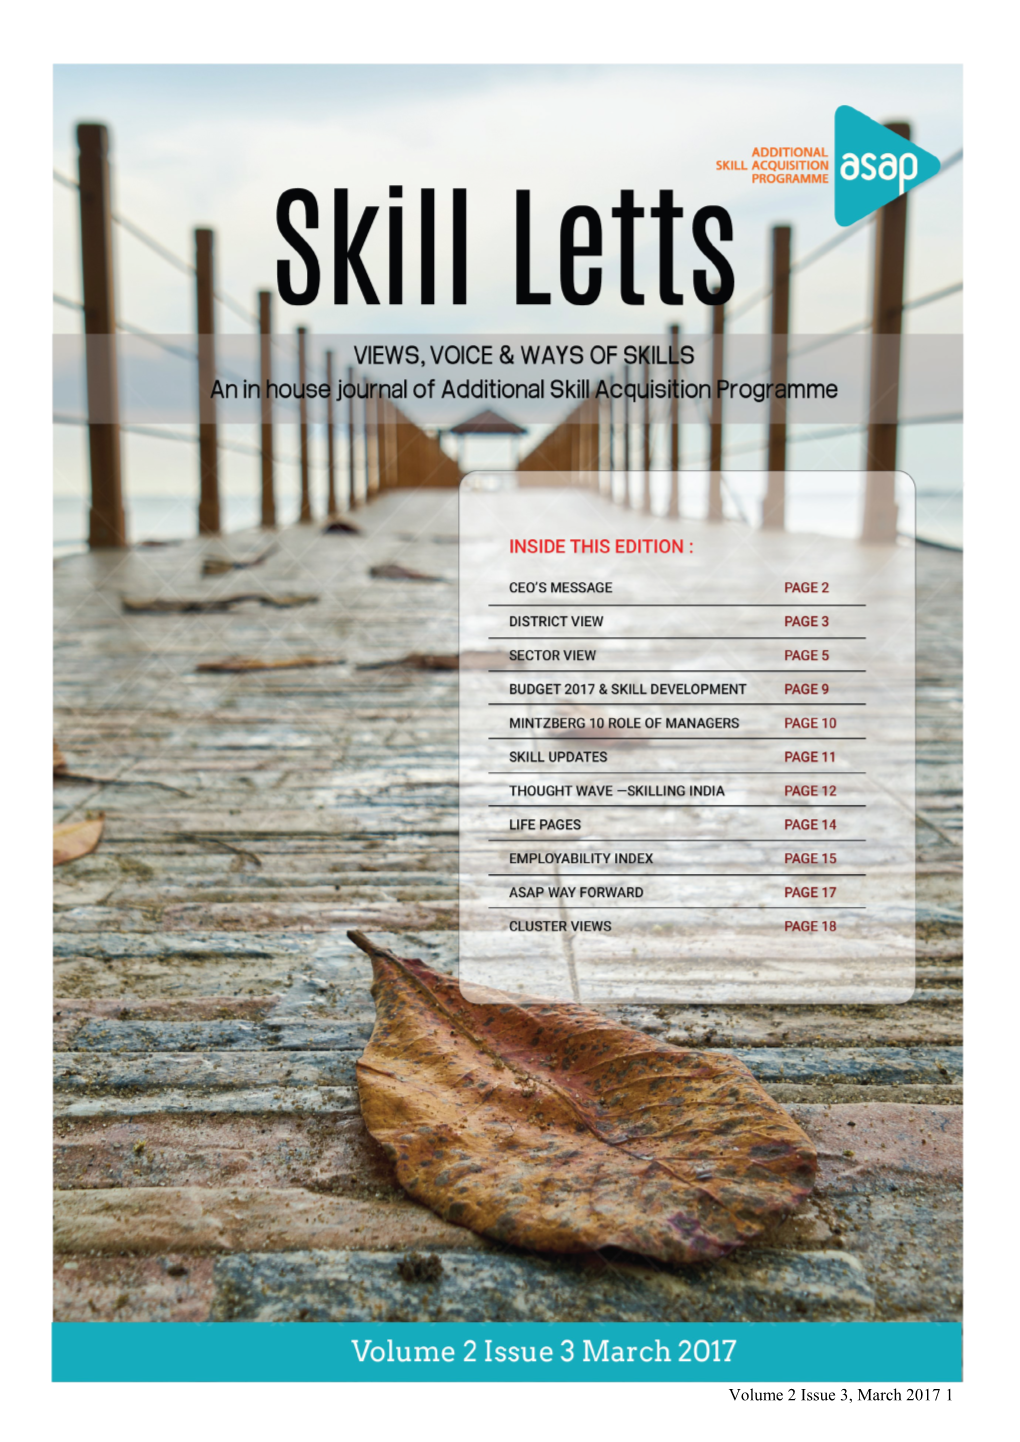 Volume 2 Issue 3, March 2017 1 Skill Letts VIEWS, VOICE & WAYS of SKILLS